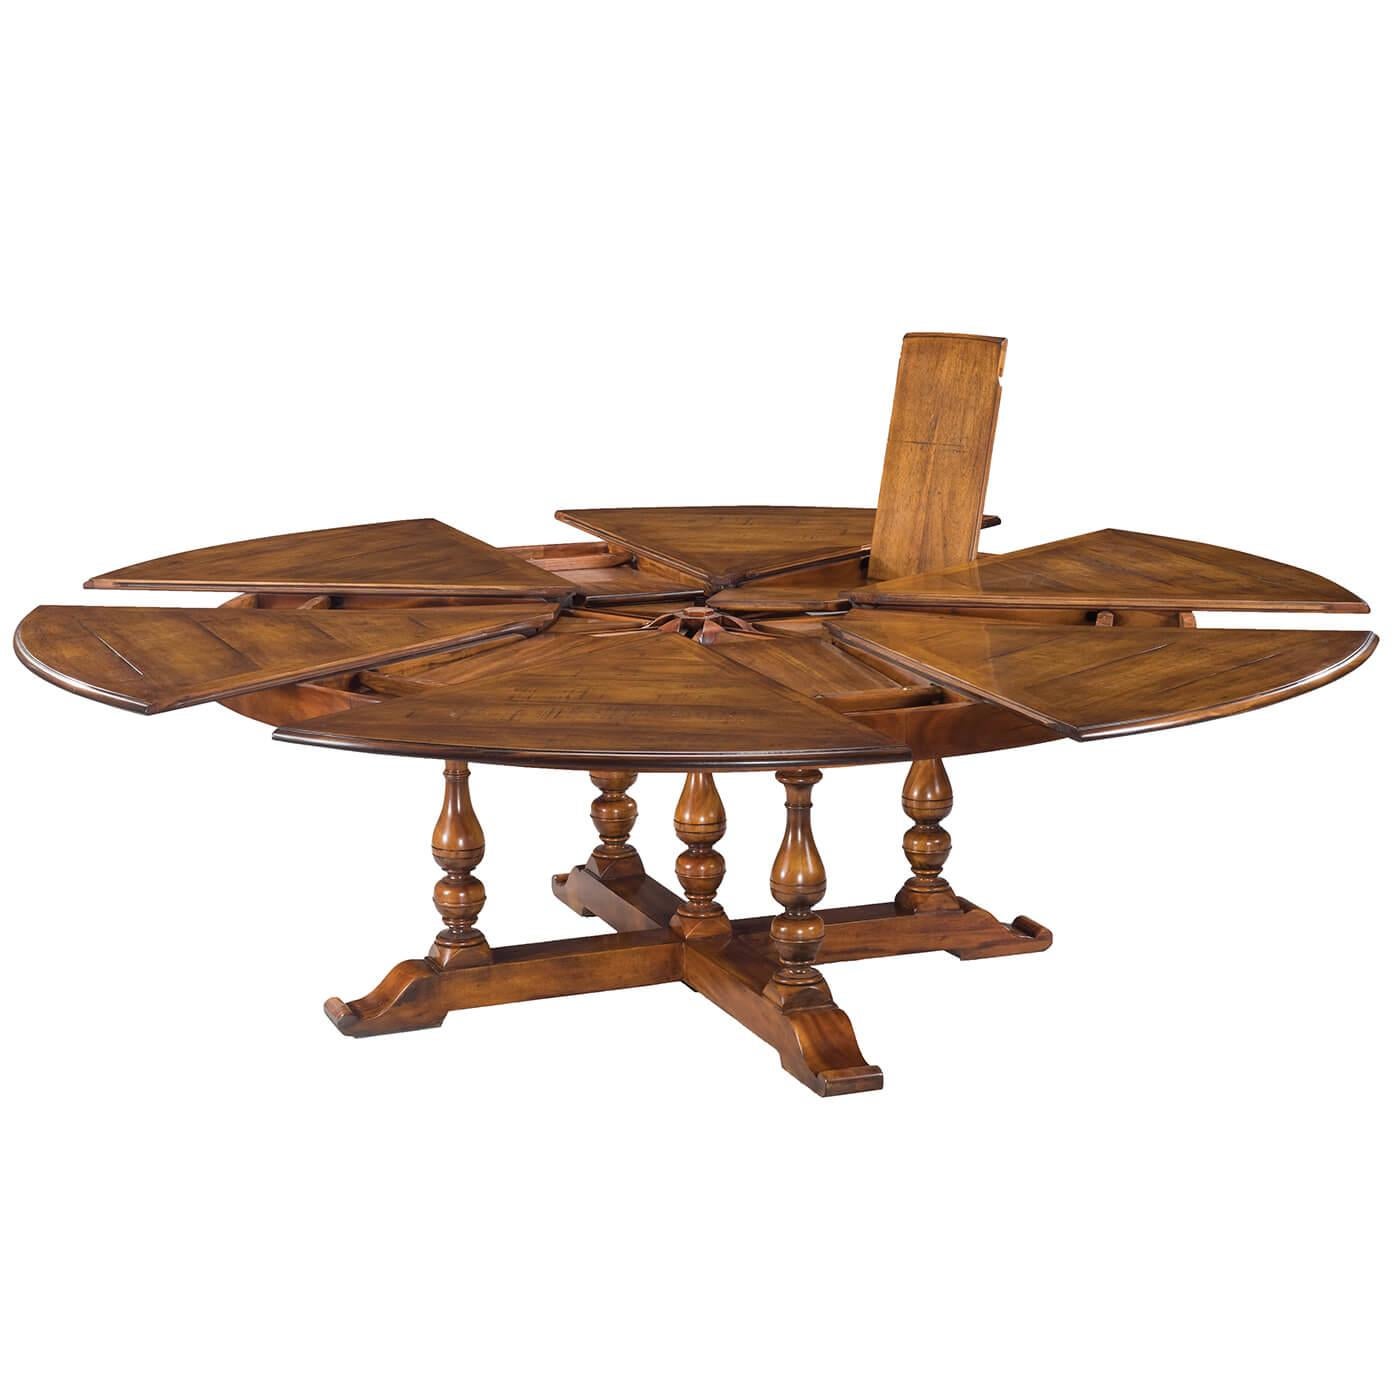 Early English style round extendable dining table. Walnut table is veneered in finely figured walnut segments and supported on four solid vase-shaped turned legs leading to the X form base.

Extra-large round size extends up to 100 inches with